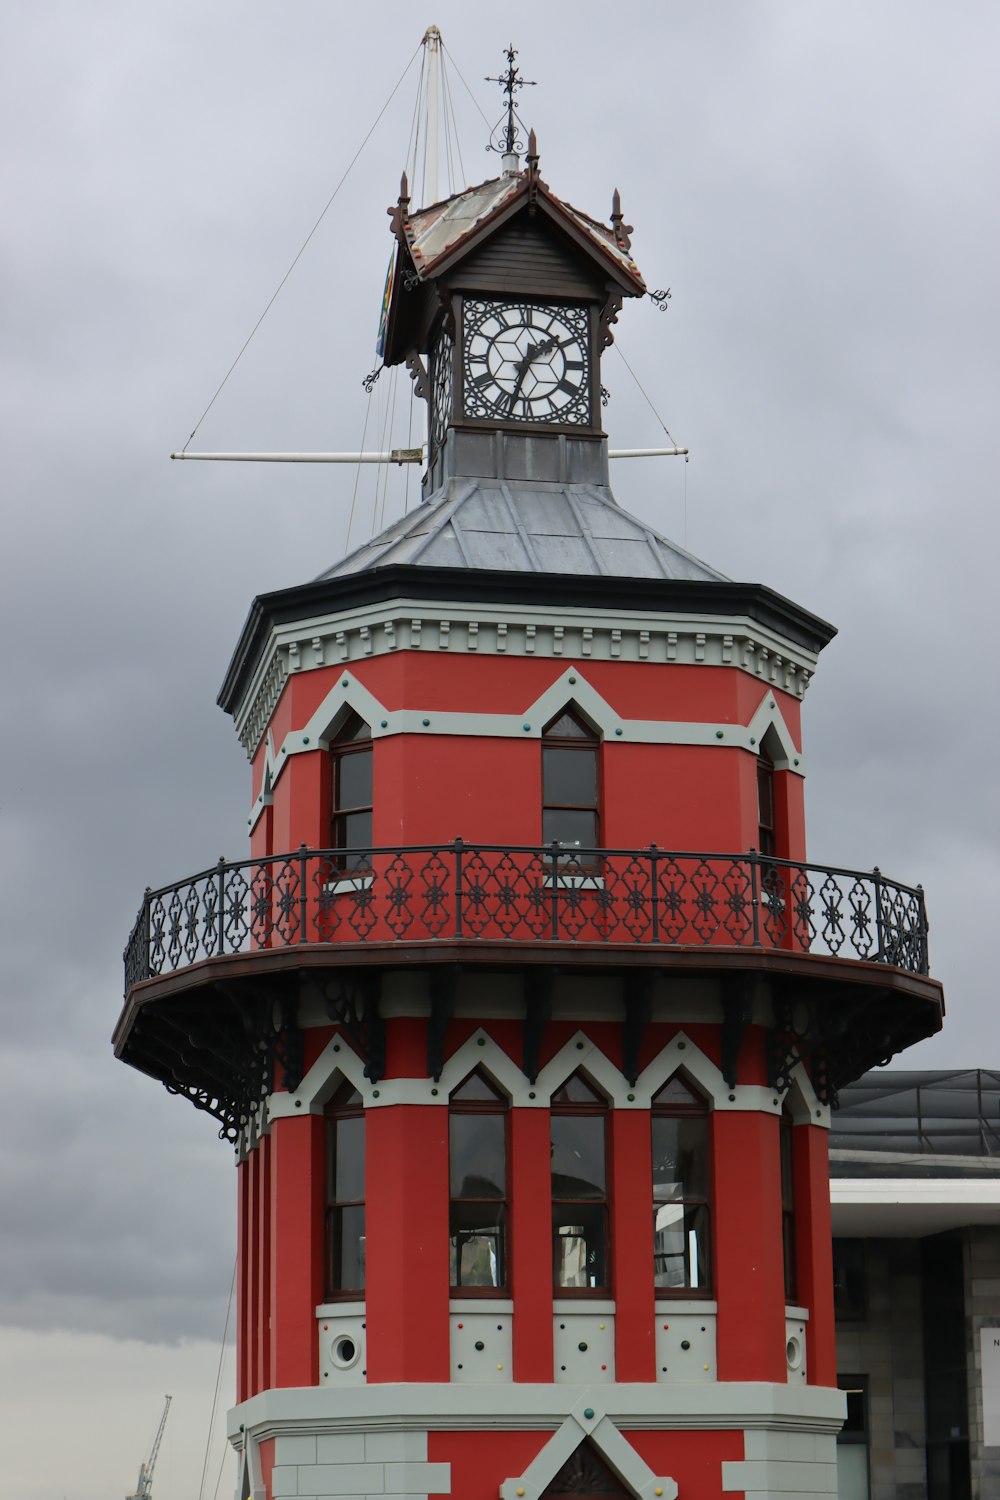 a red tower with a clock on top of it